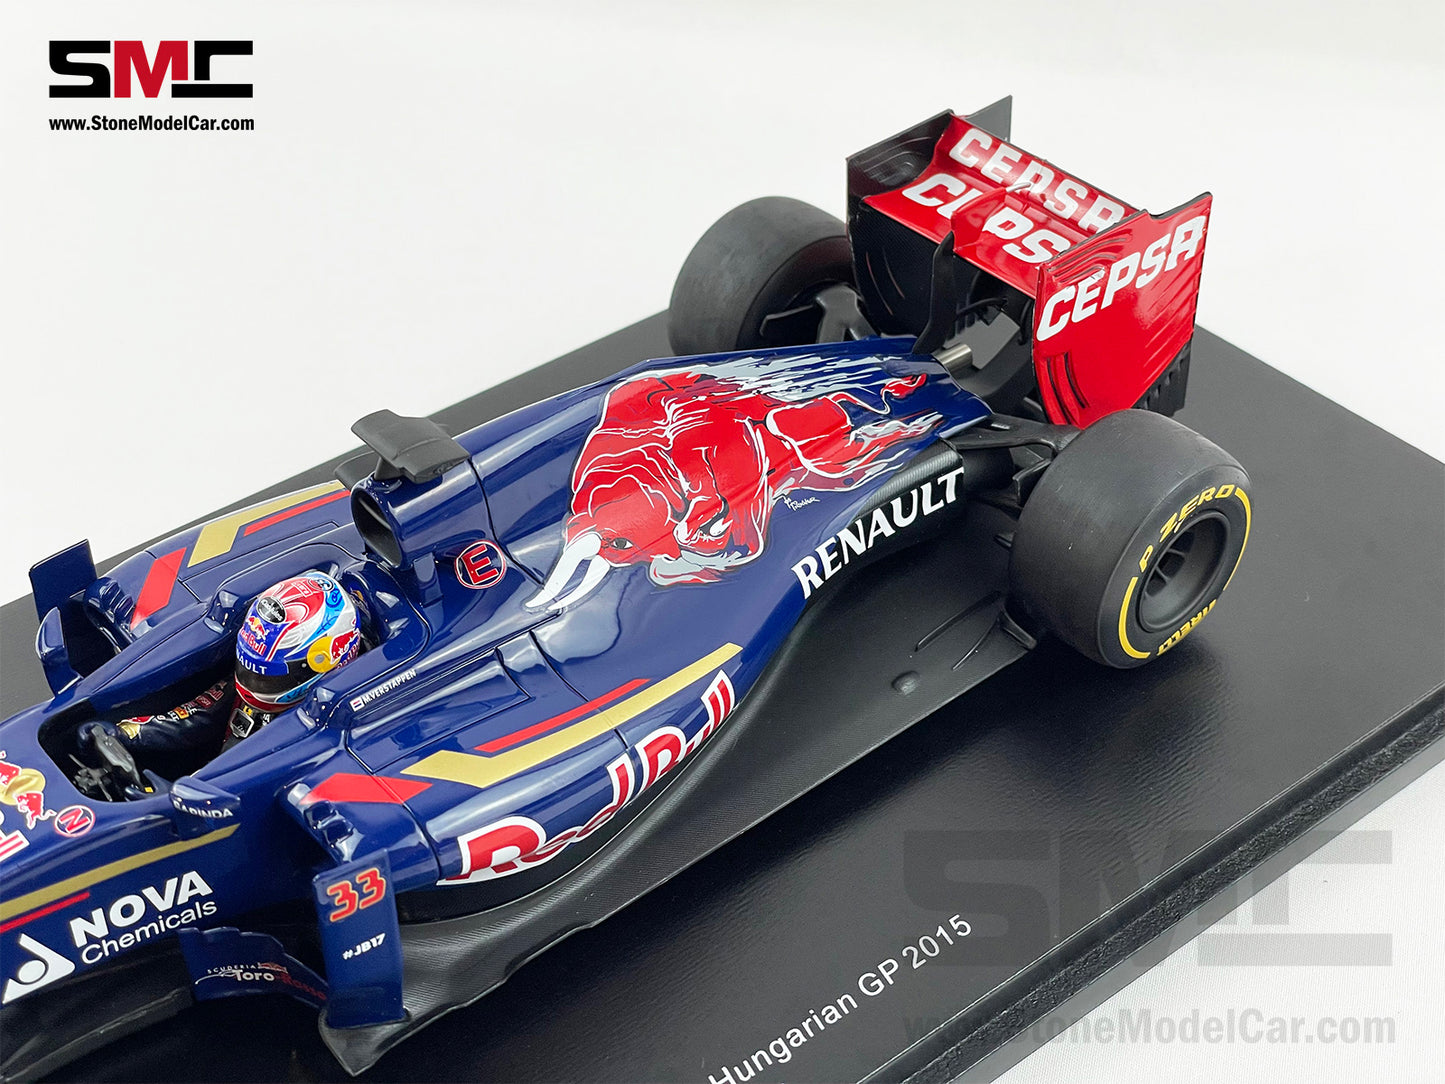 1:18 Spark Toro Rosso F1 STR10 #33 Max Verstappen Hungary GP Best Place in 2015